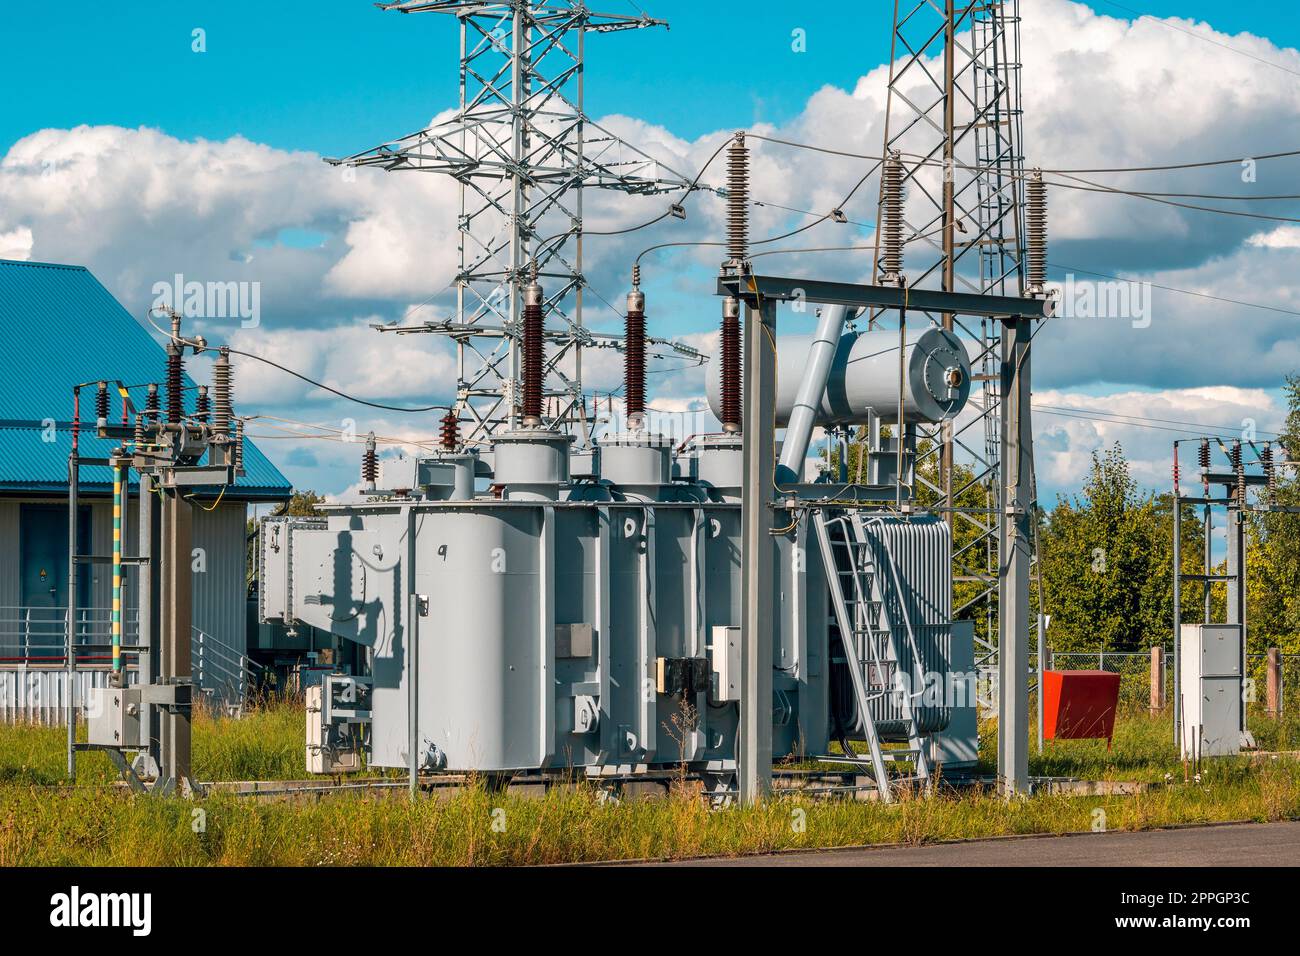 Maintenance Power Transformer in High Voltage Electrical Substation Stock Photo